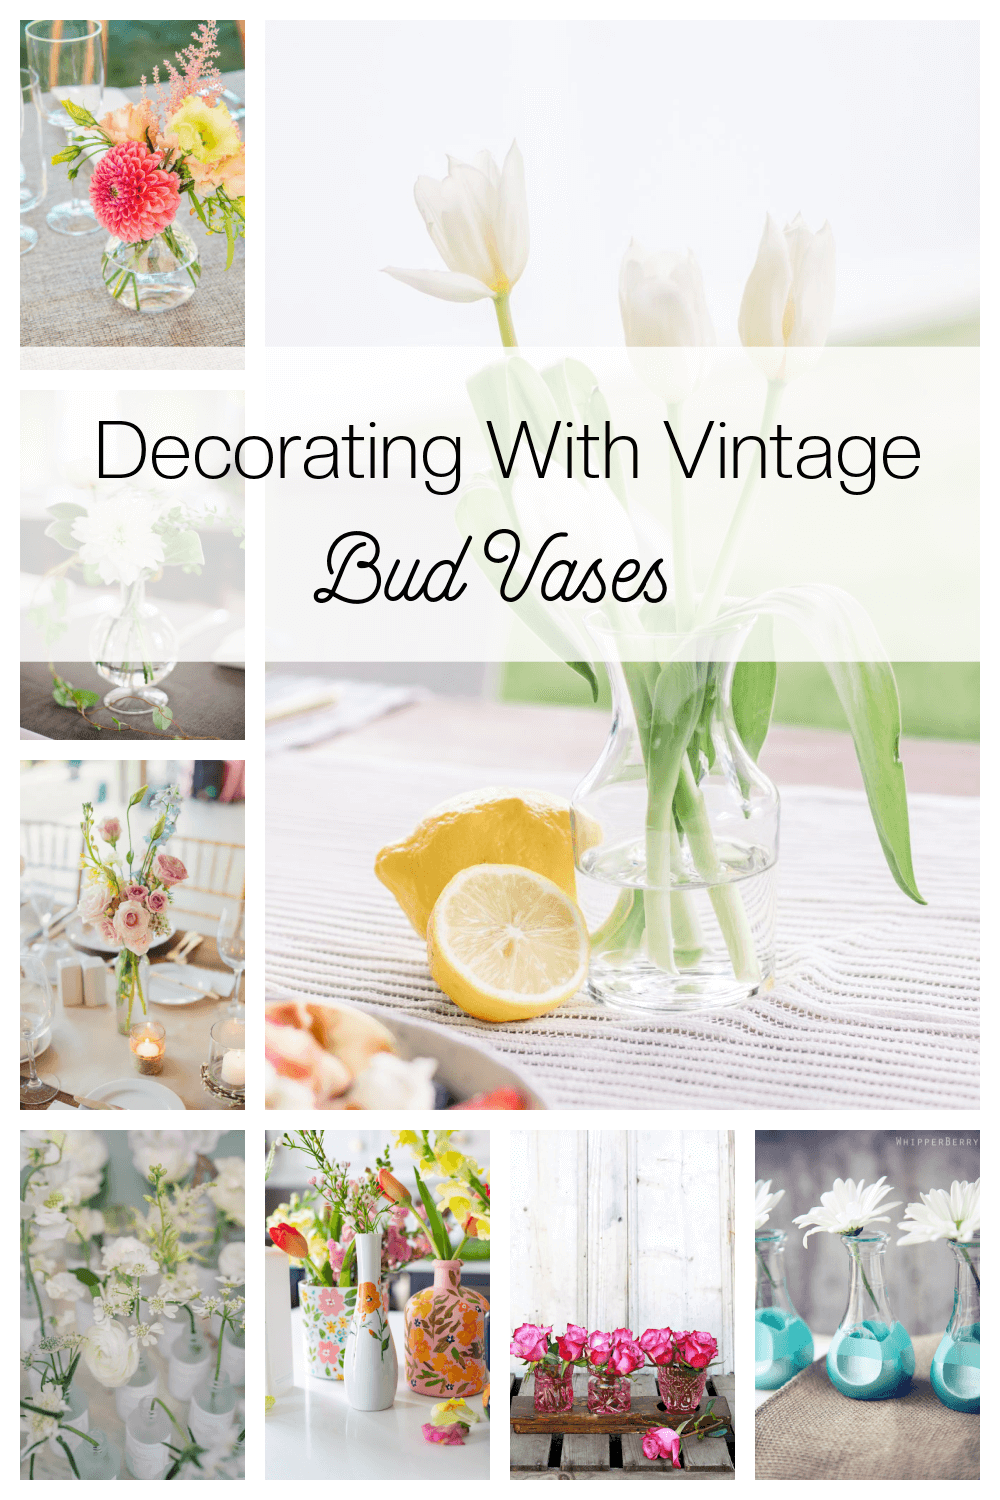 In Decorating With Vintage Bud Vases, this is the graphic I created for this post.